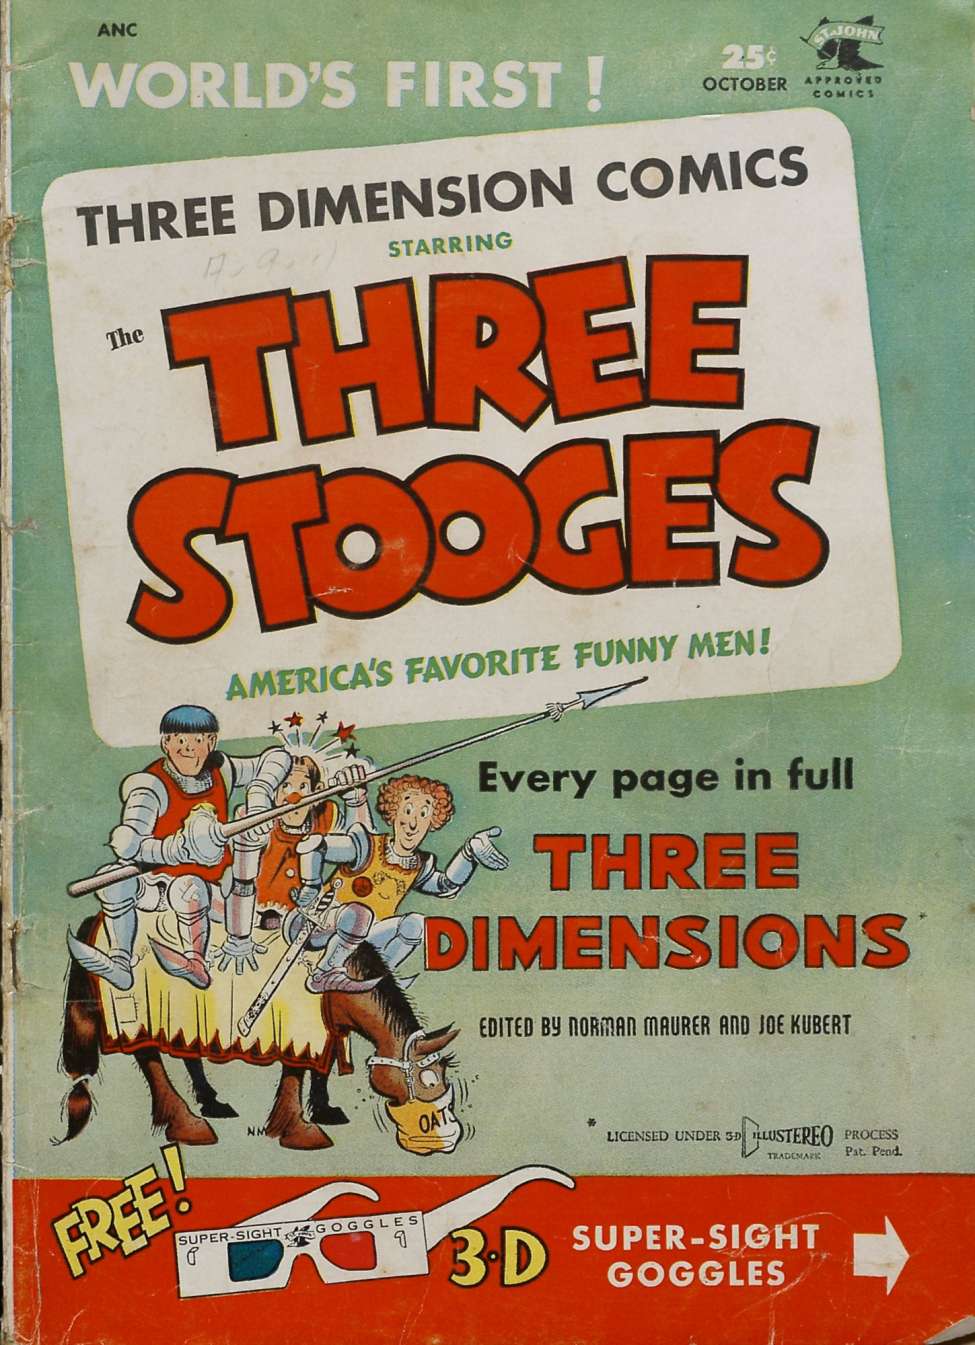 Comic Book Cover For The Three Stooges 2 (3D)